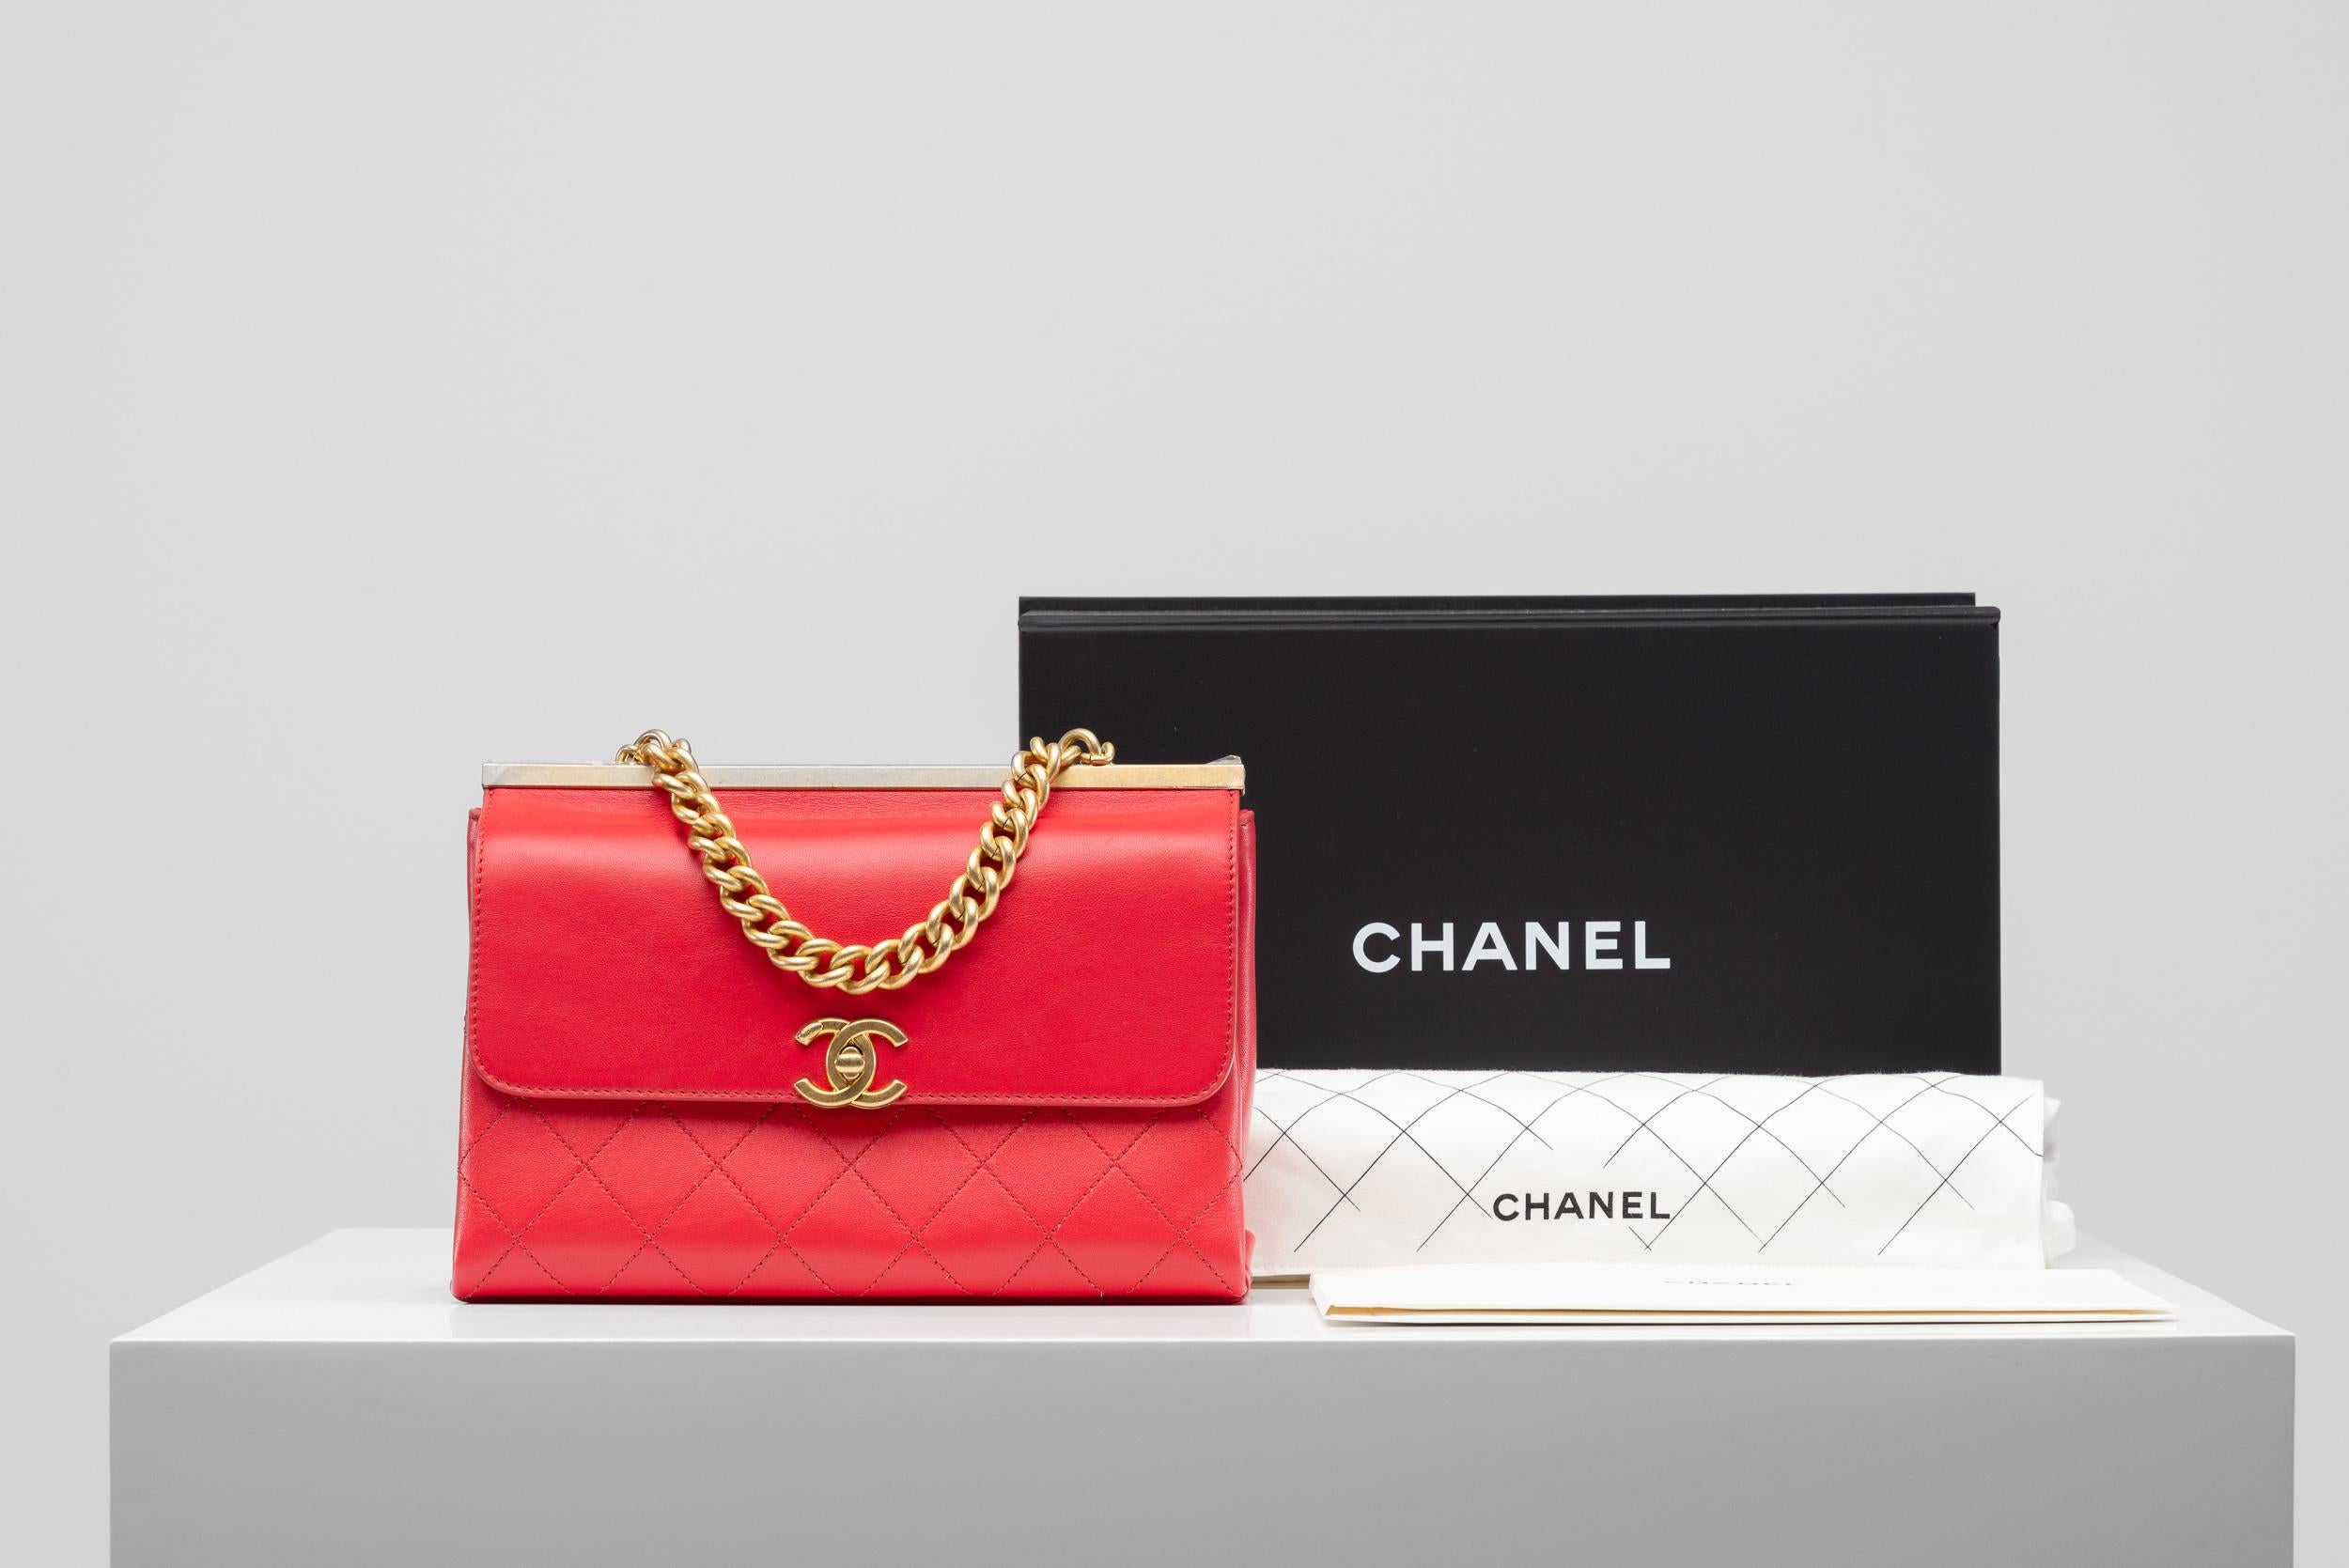 From the collection of SAVINETI we offer this special Chanel Red Flap bag:
-    Brand: Chanel
-    Model: Classic Flap Medium
-    Year: 2020
-    Condition: Excellent
-    Materials: Lambskin leather, gold-brushed hardware
-    Extras: Full-Set